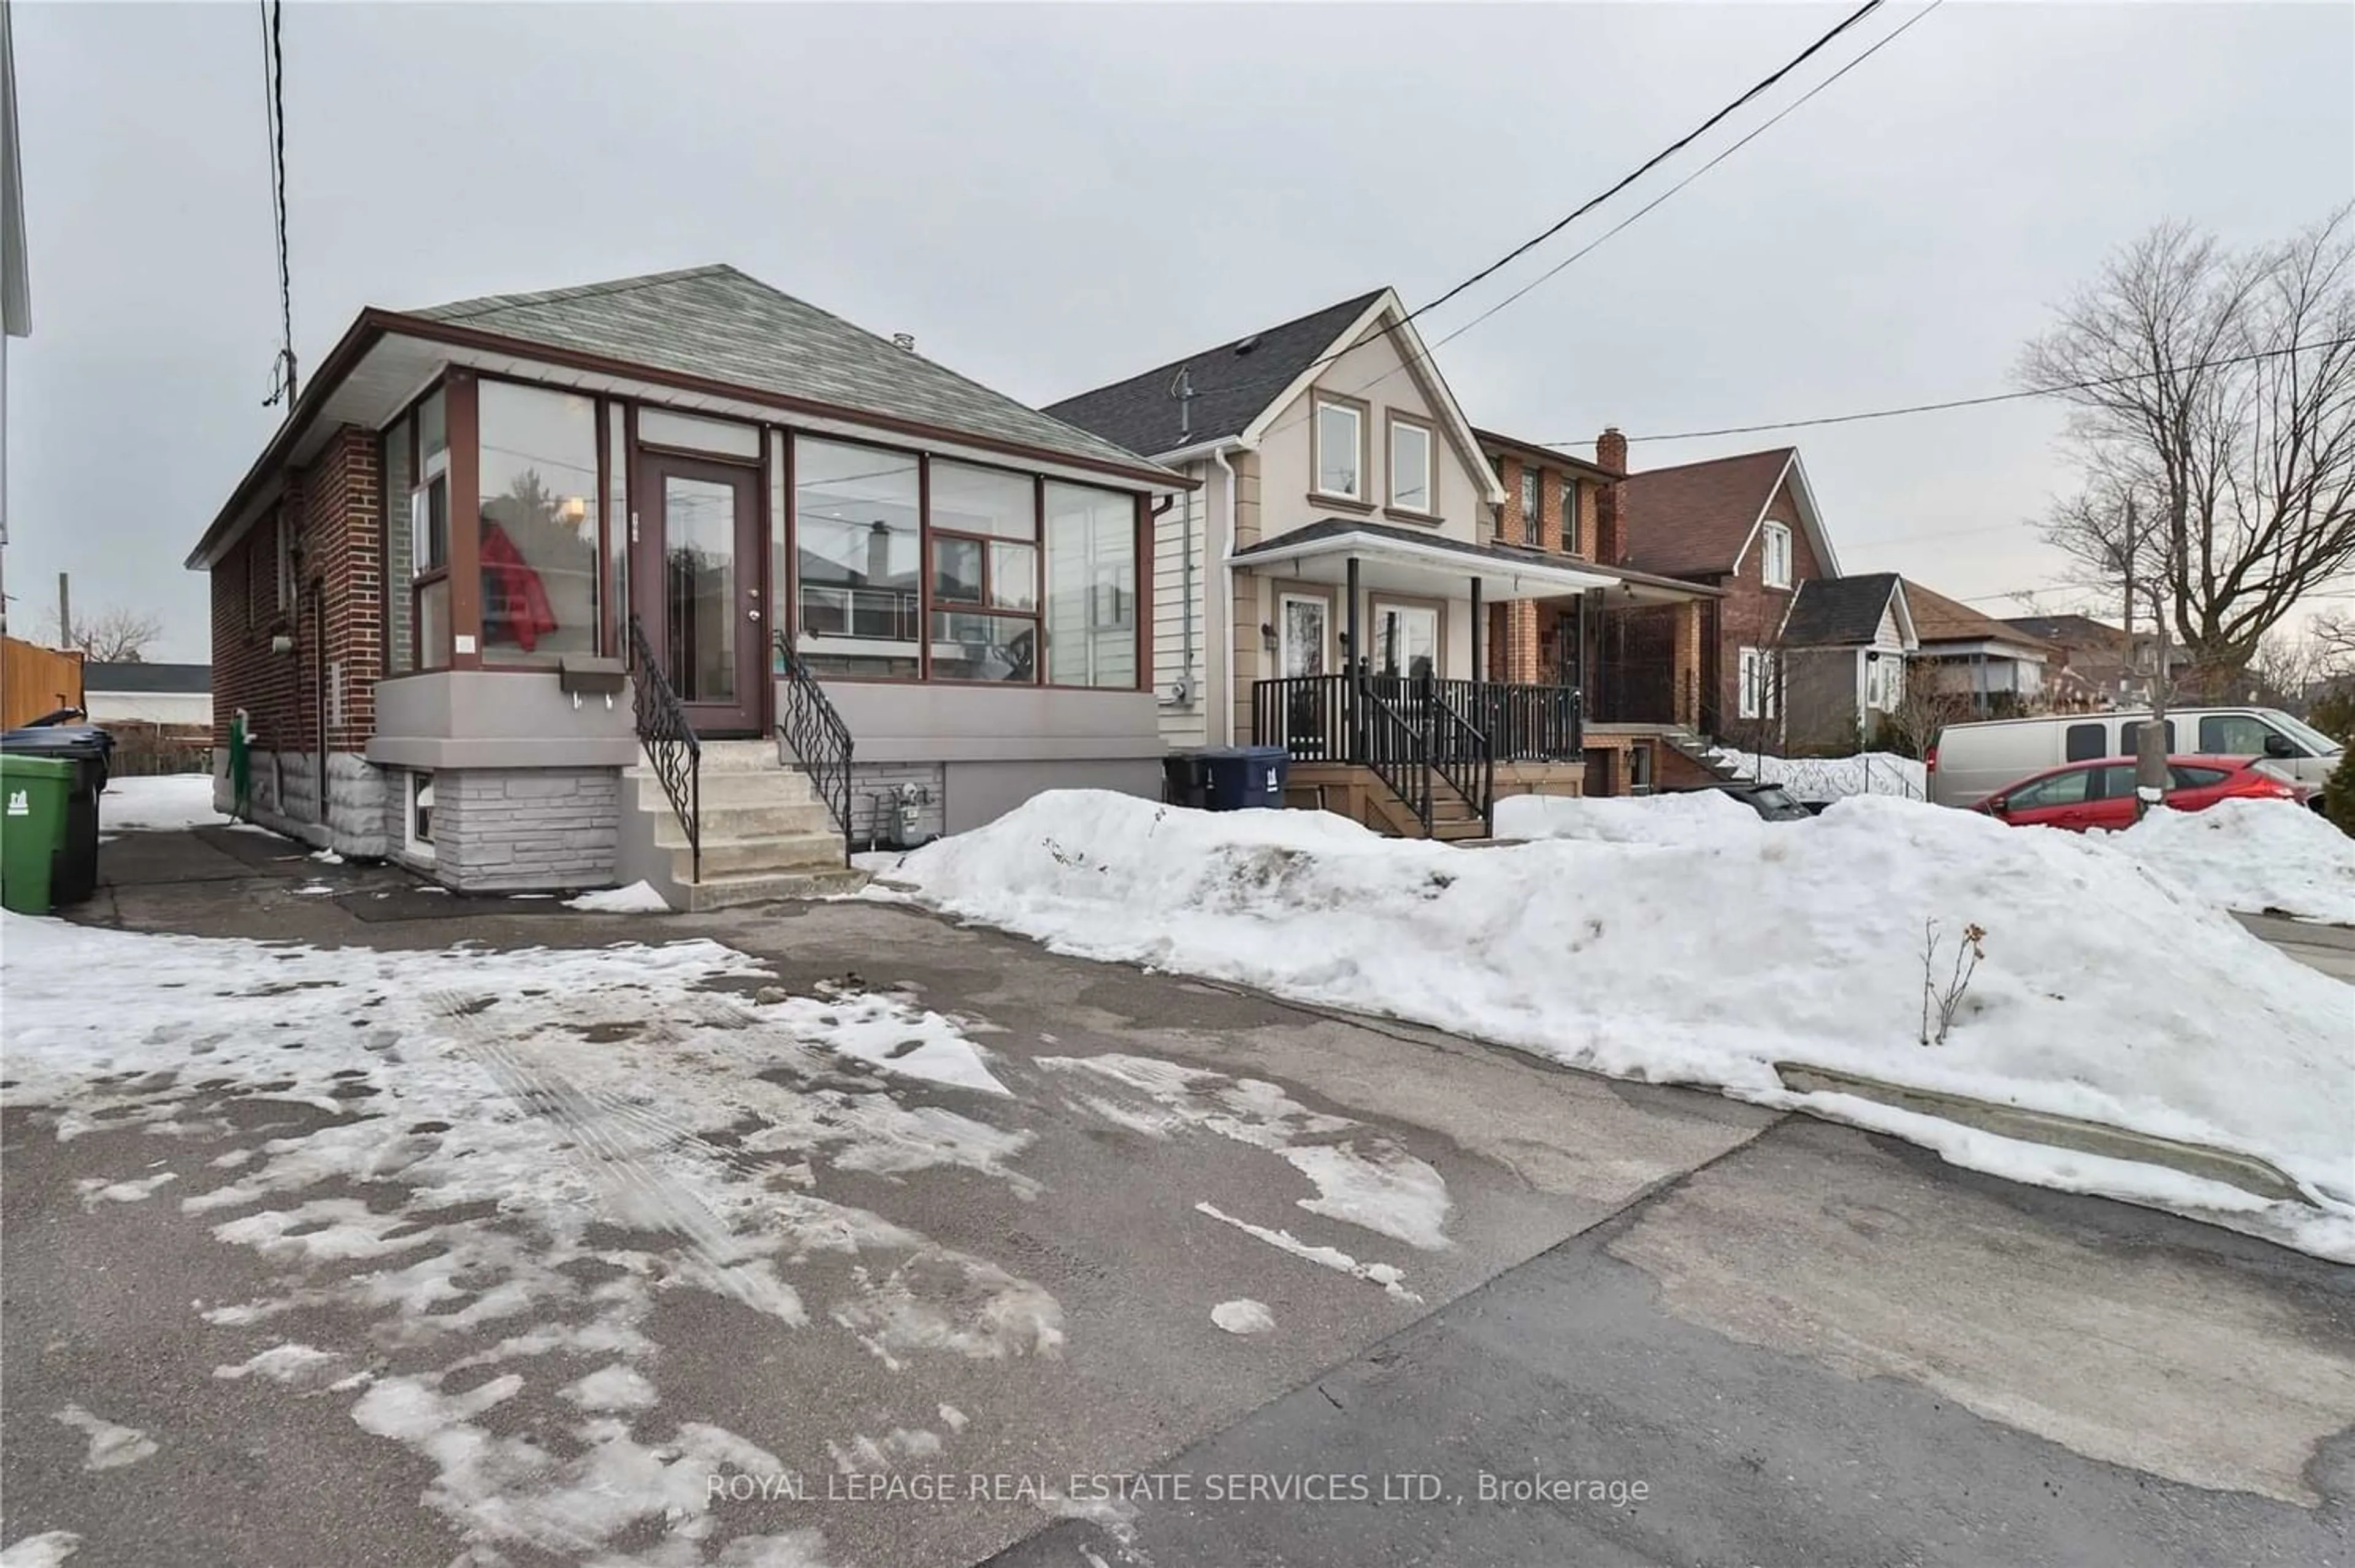 Street view for 109 Bowie Ave, Toronto Ontario M6E 2P8